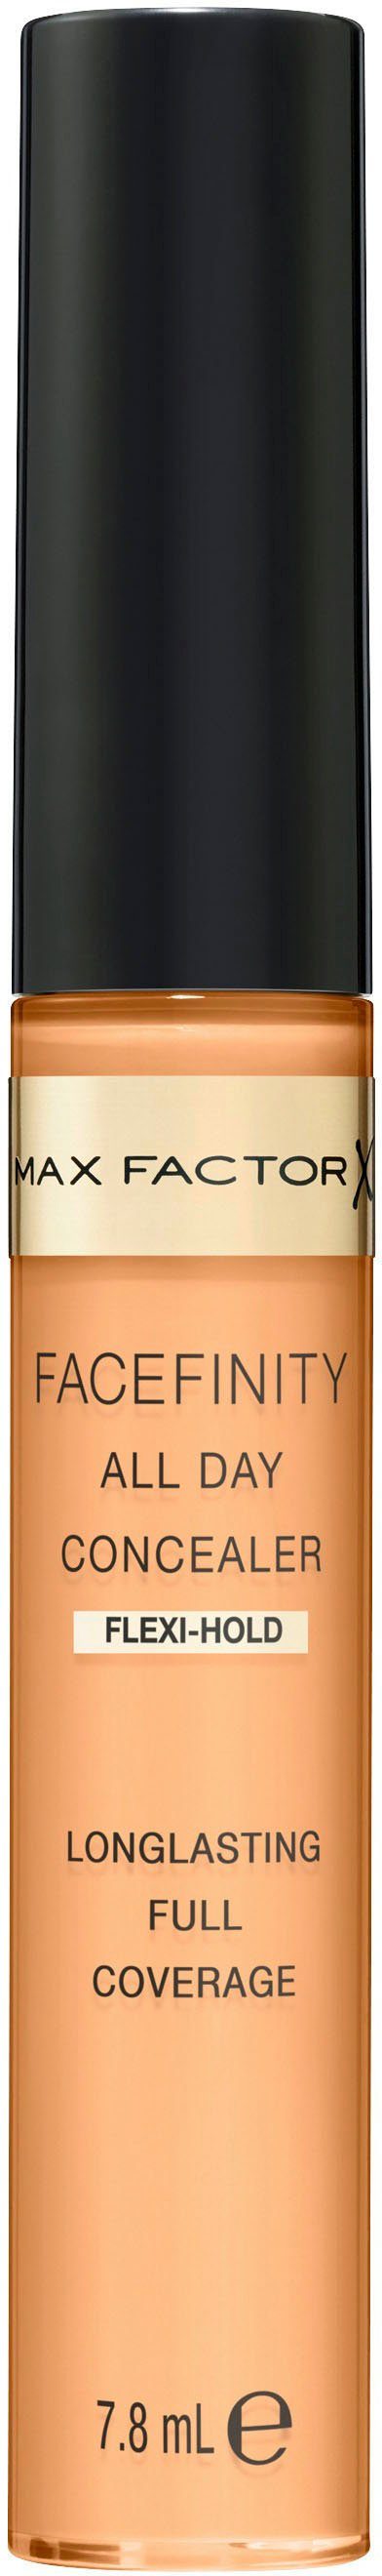 MAX FACTOR Concealer FACEFINITY 70 Day Flawless All